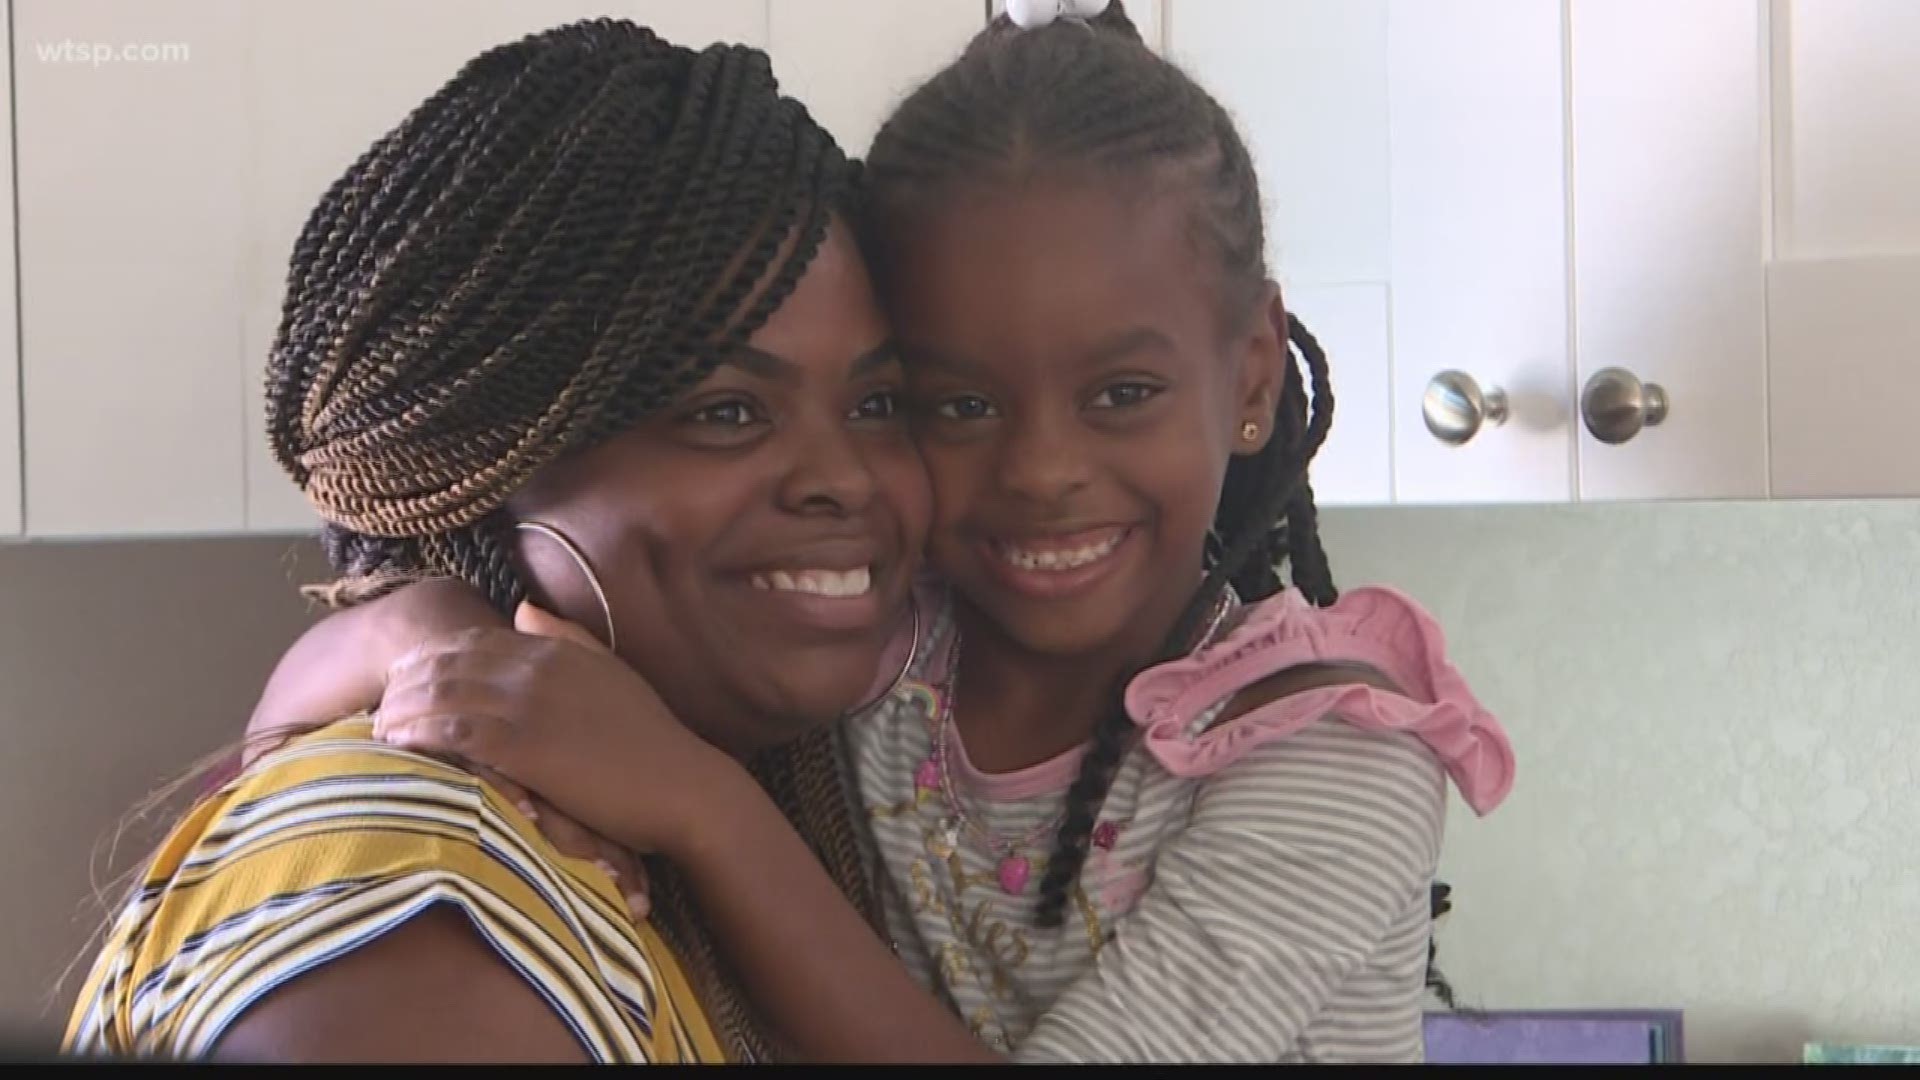 It's not jingle bells but the jingle of keys: the happy sound of the season for Shanequa Shorter and her daughter.